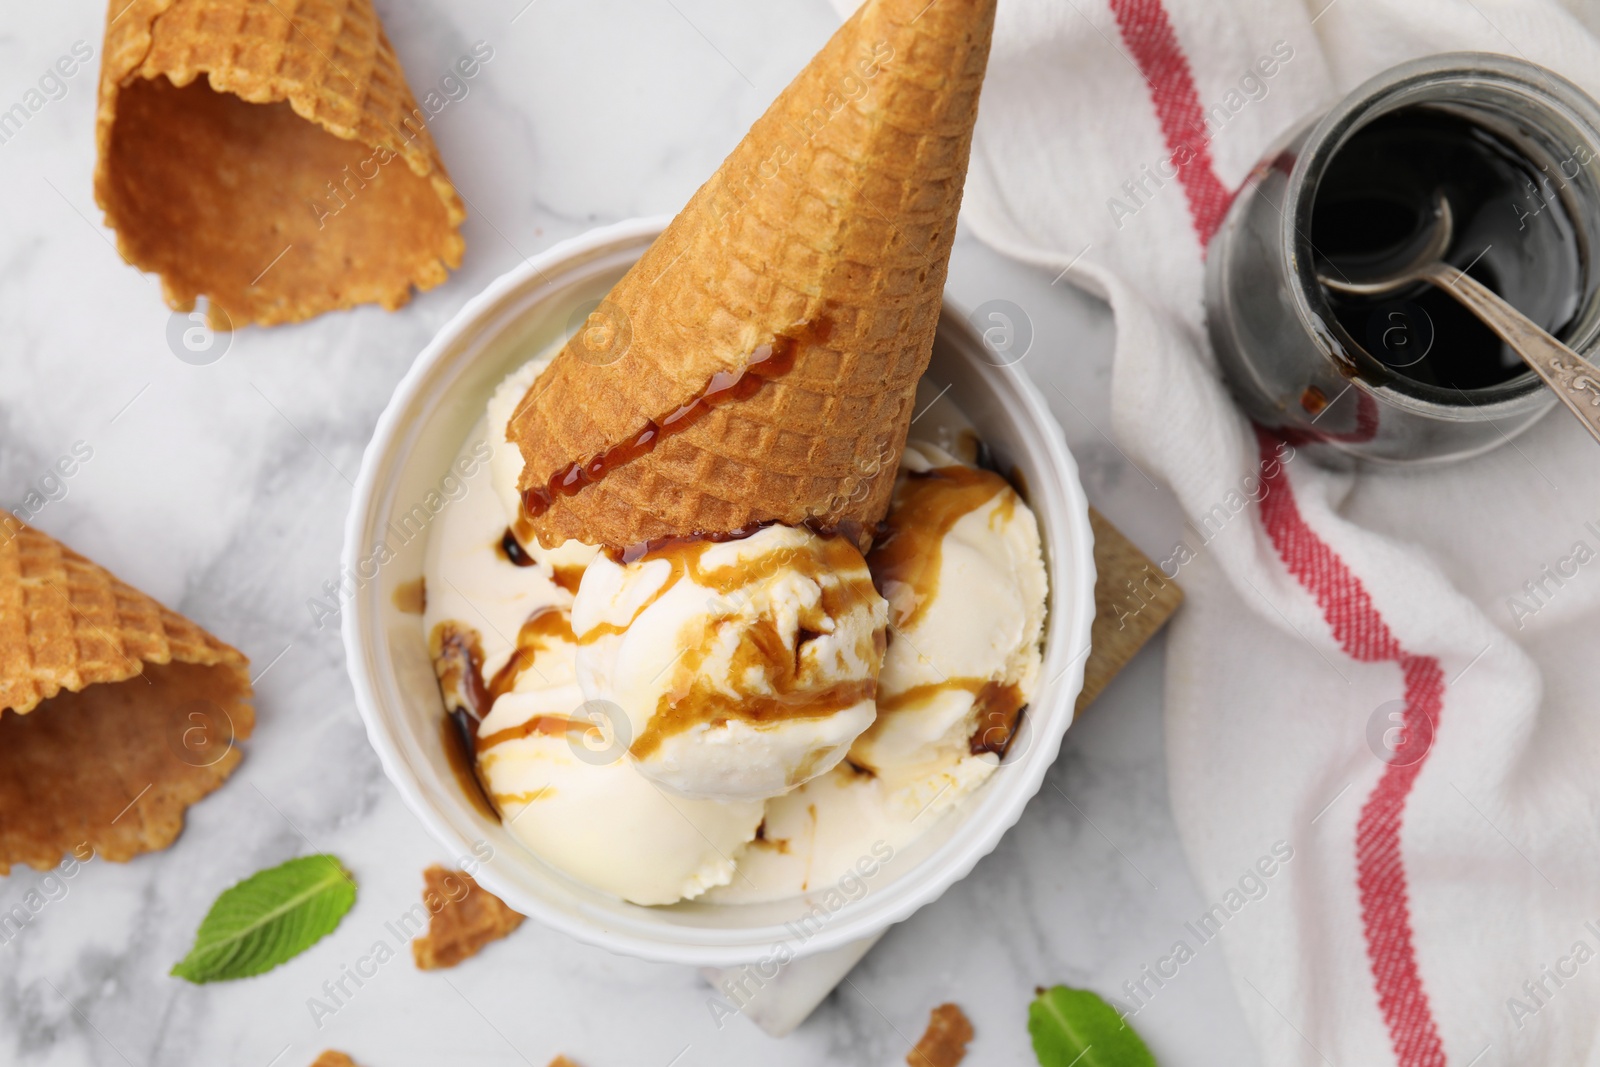 Photo of Scoops of ice cream with caramel sauce, mint leaves and cone on white marble table, flat lay